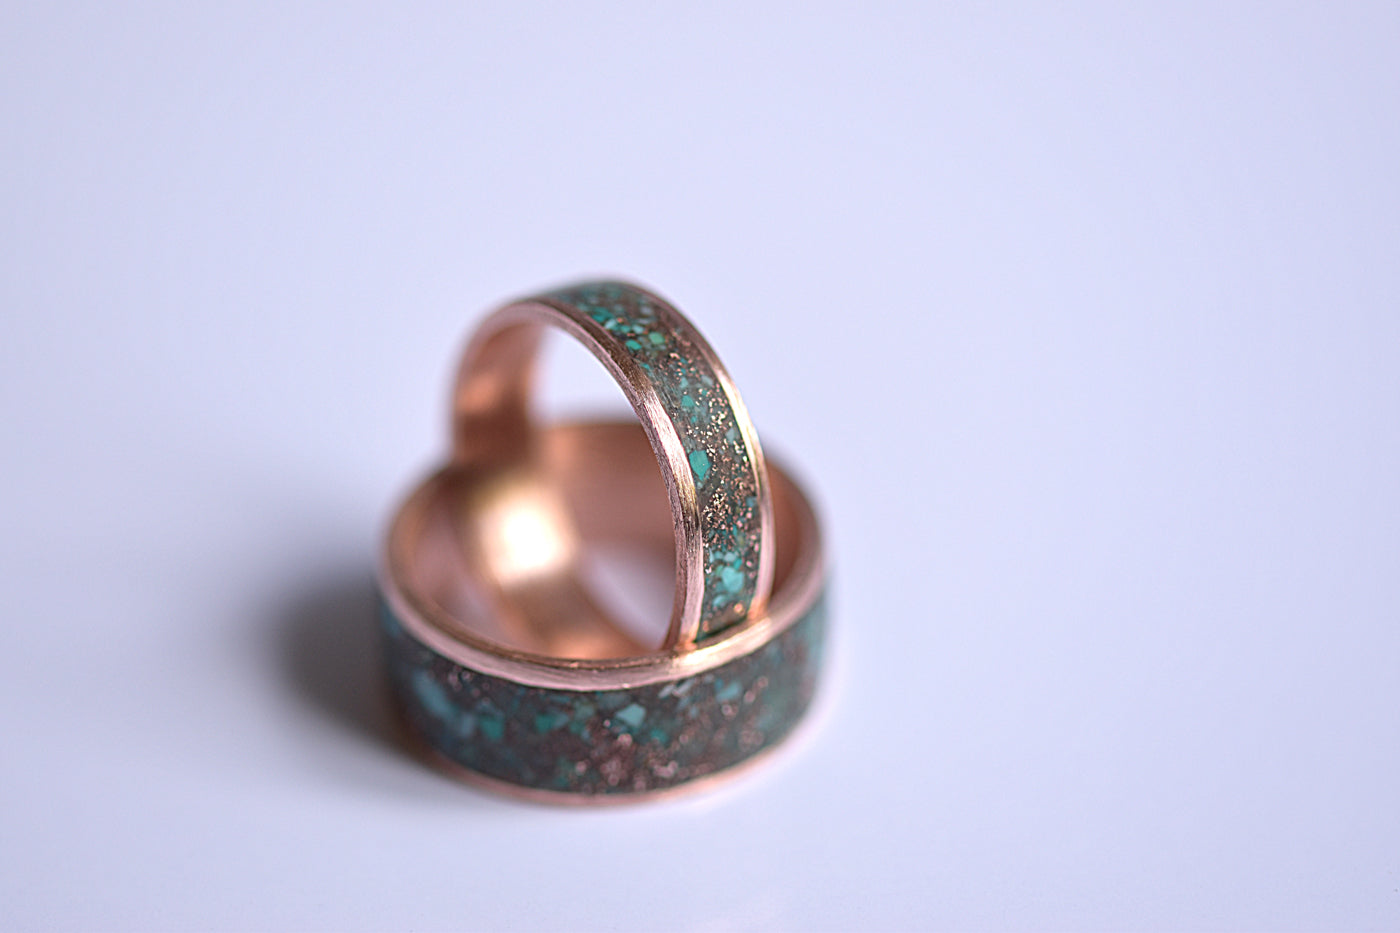 Matching Gold Inlay Wedding Bands with Turquoise Inlay